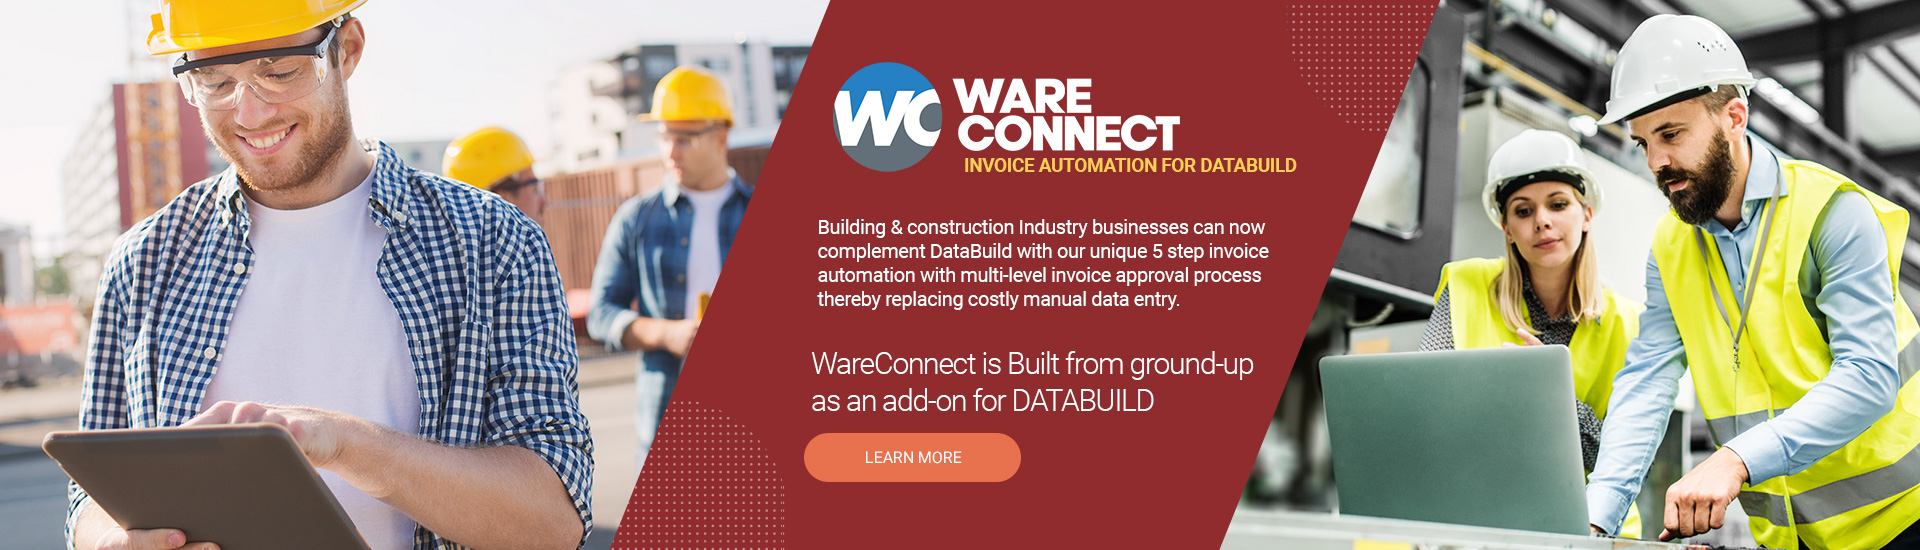 Building & construction Industry businesses can now complement DataBuild with our unique 5 step invoice automation with multi-level invoice approval process thereby replacing costly manual data entry.
